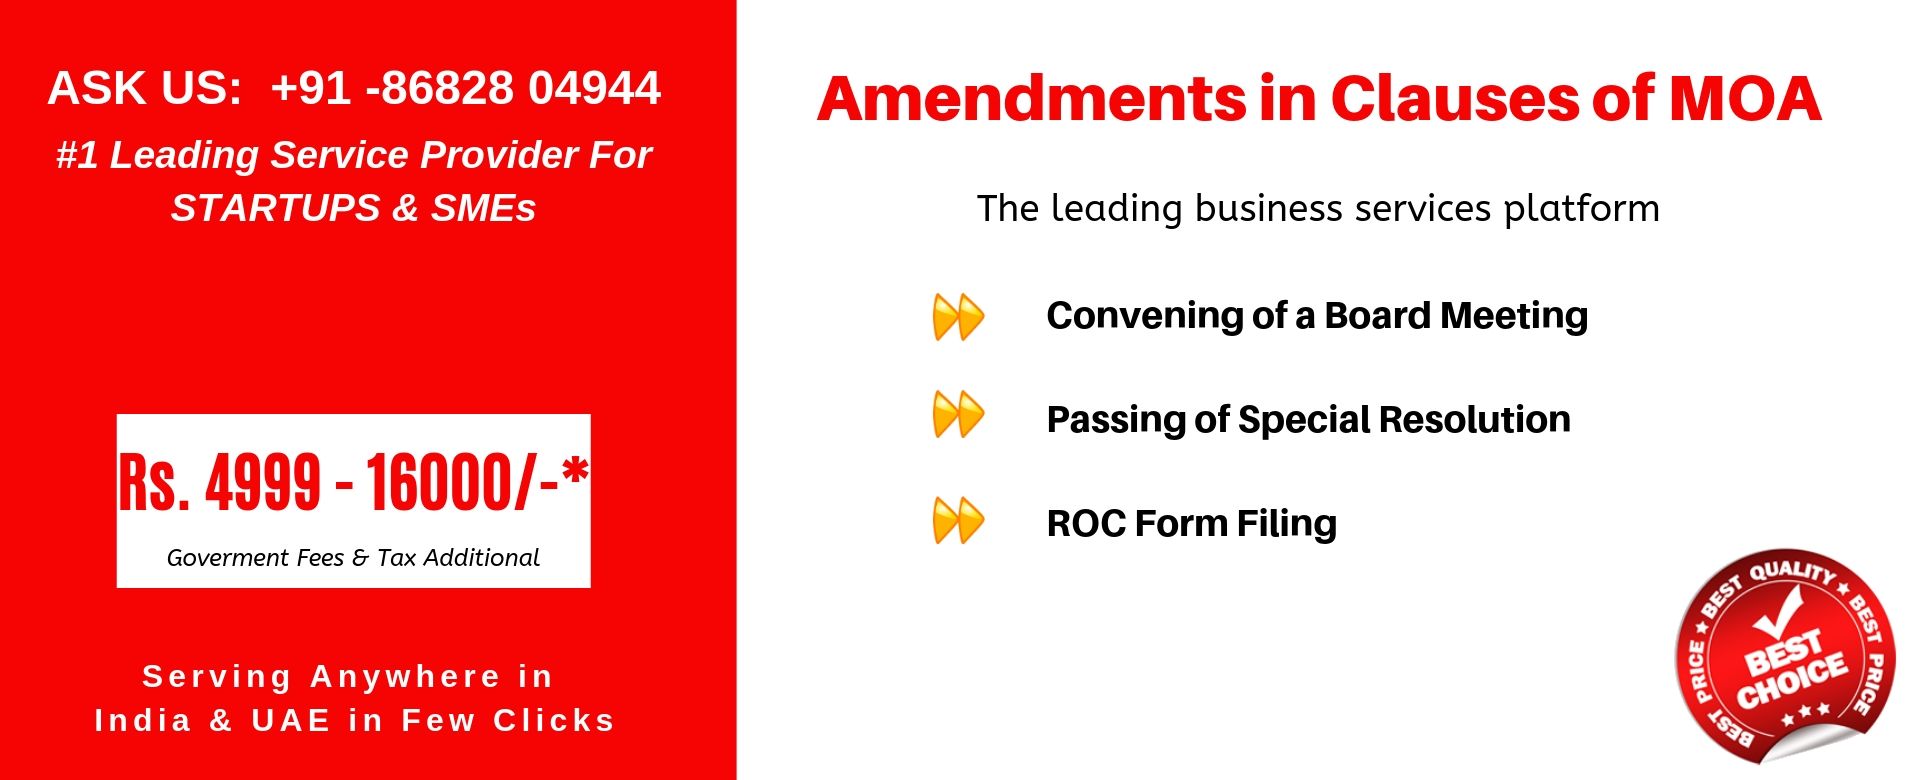 amendments in clauses of moa india